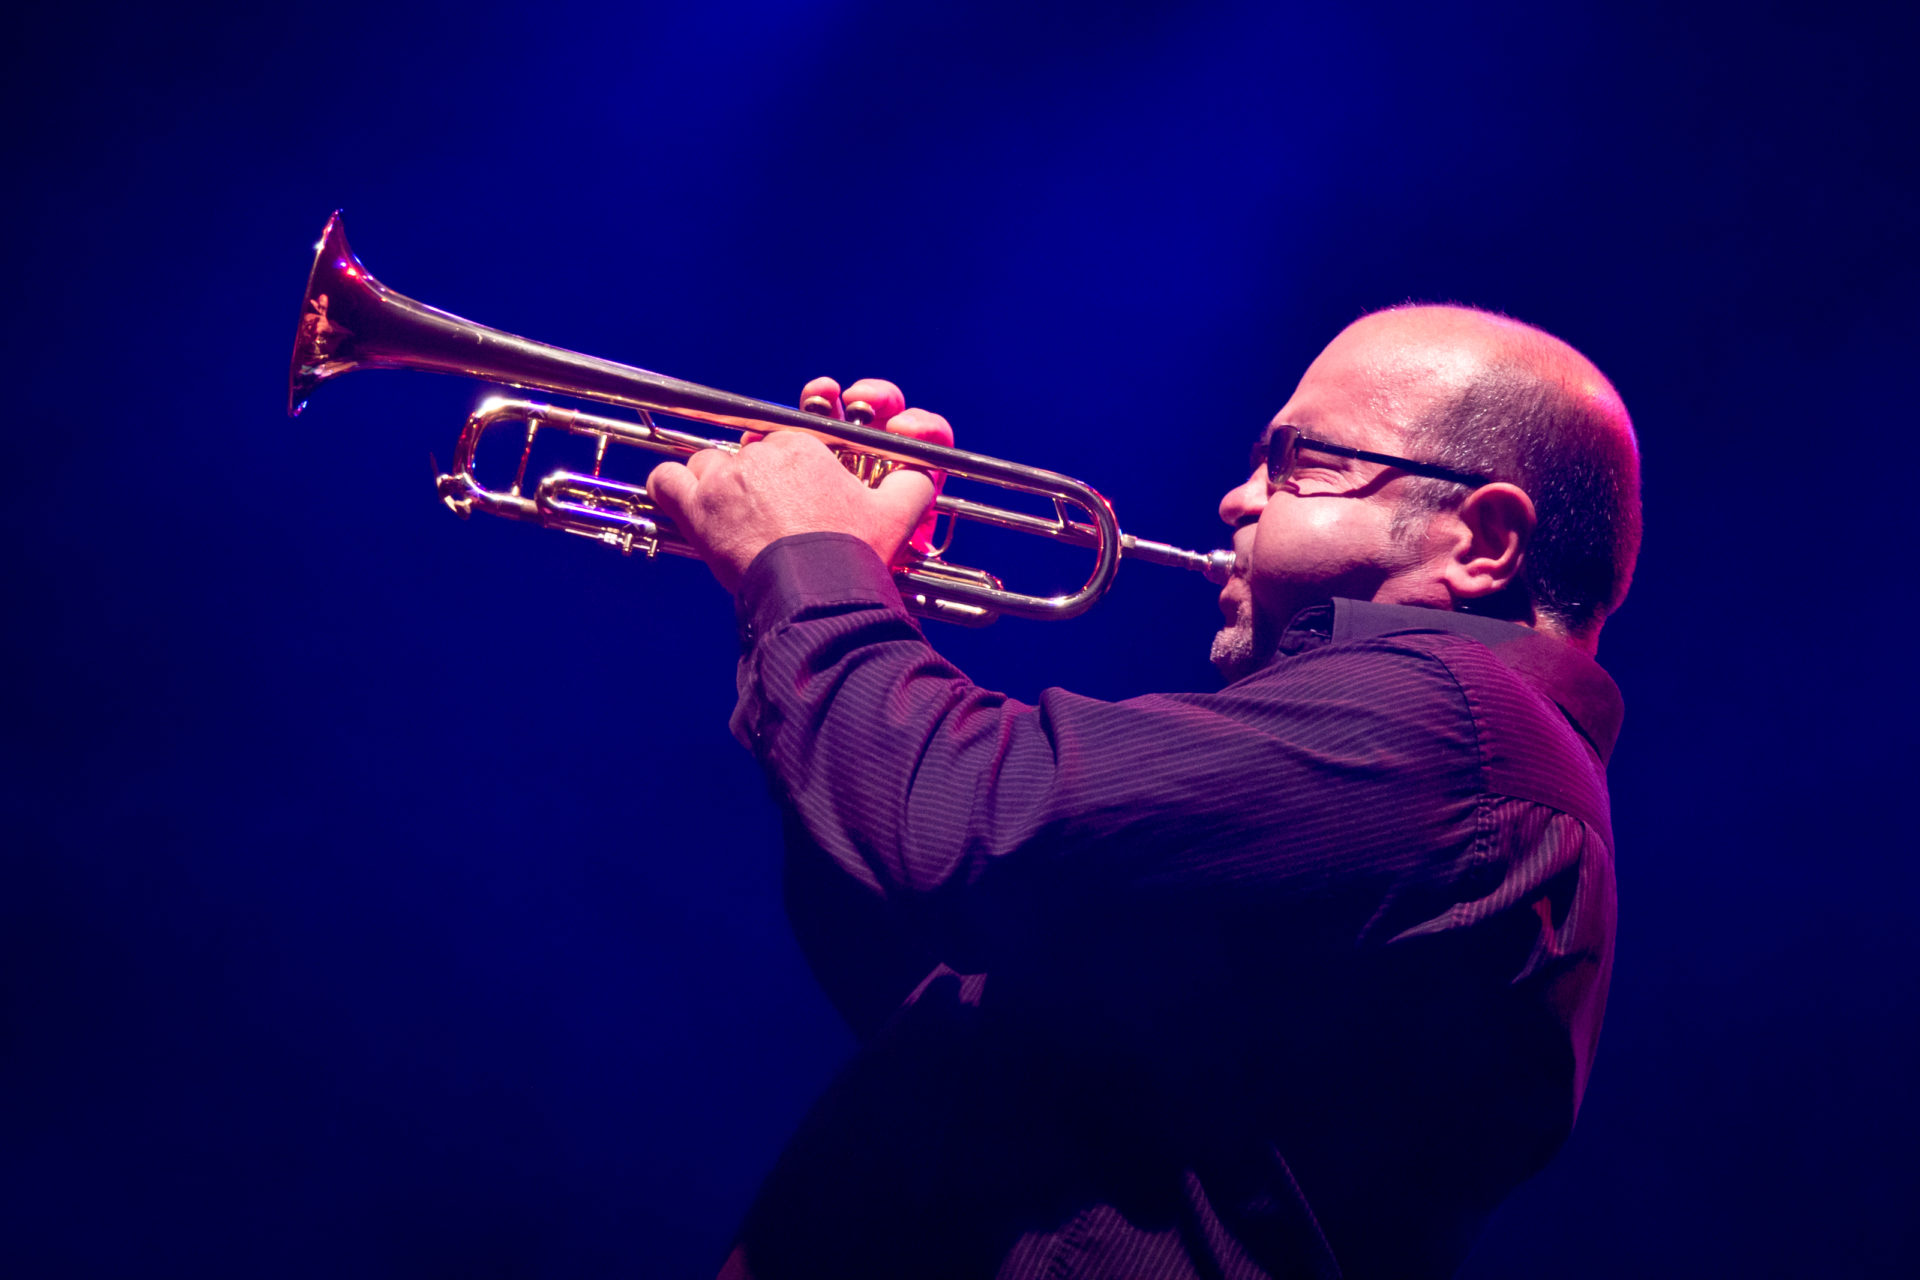 Reinaldo Melián, trumpeter of Chucho Valdés & The Afro-Cuban Messengers, at a concert in Teatro Circo Price, Madrid, Spain.